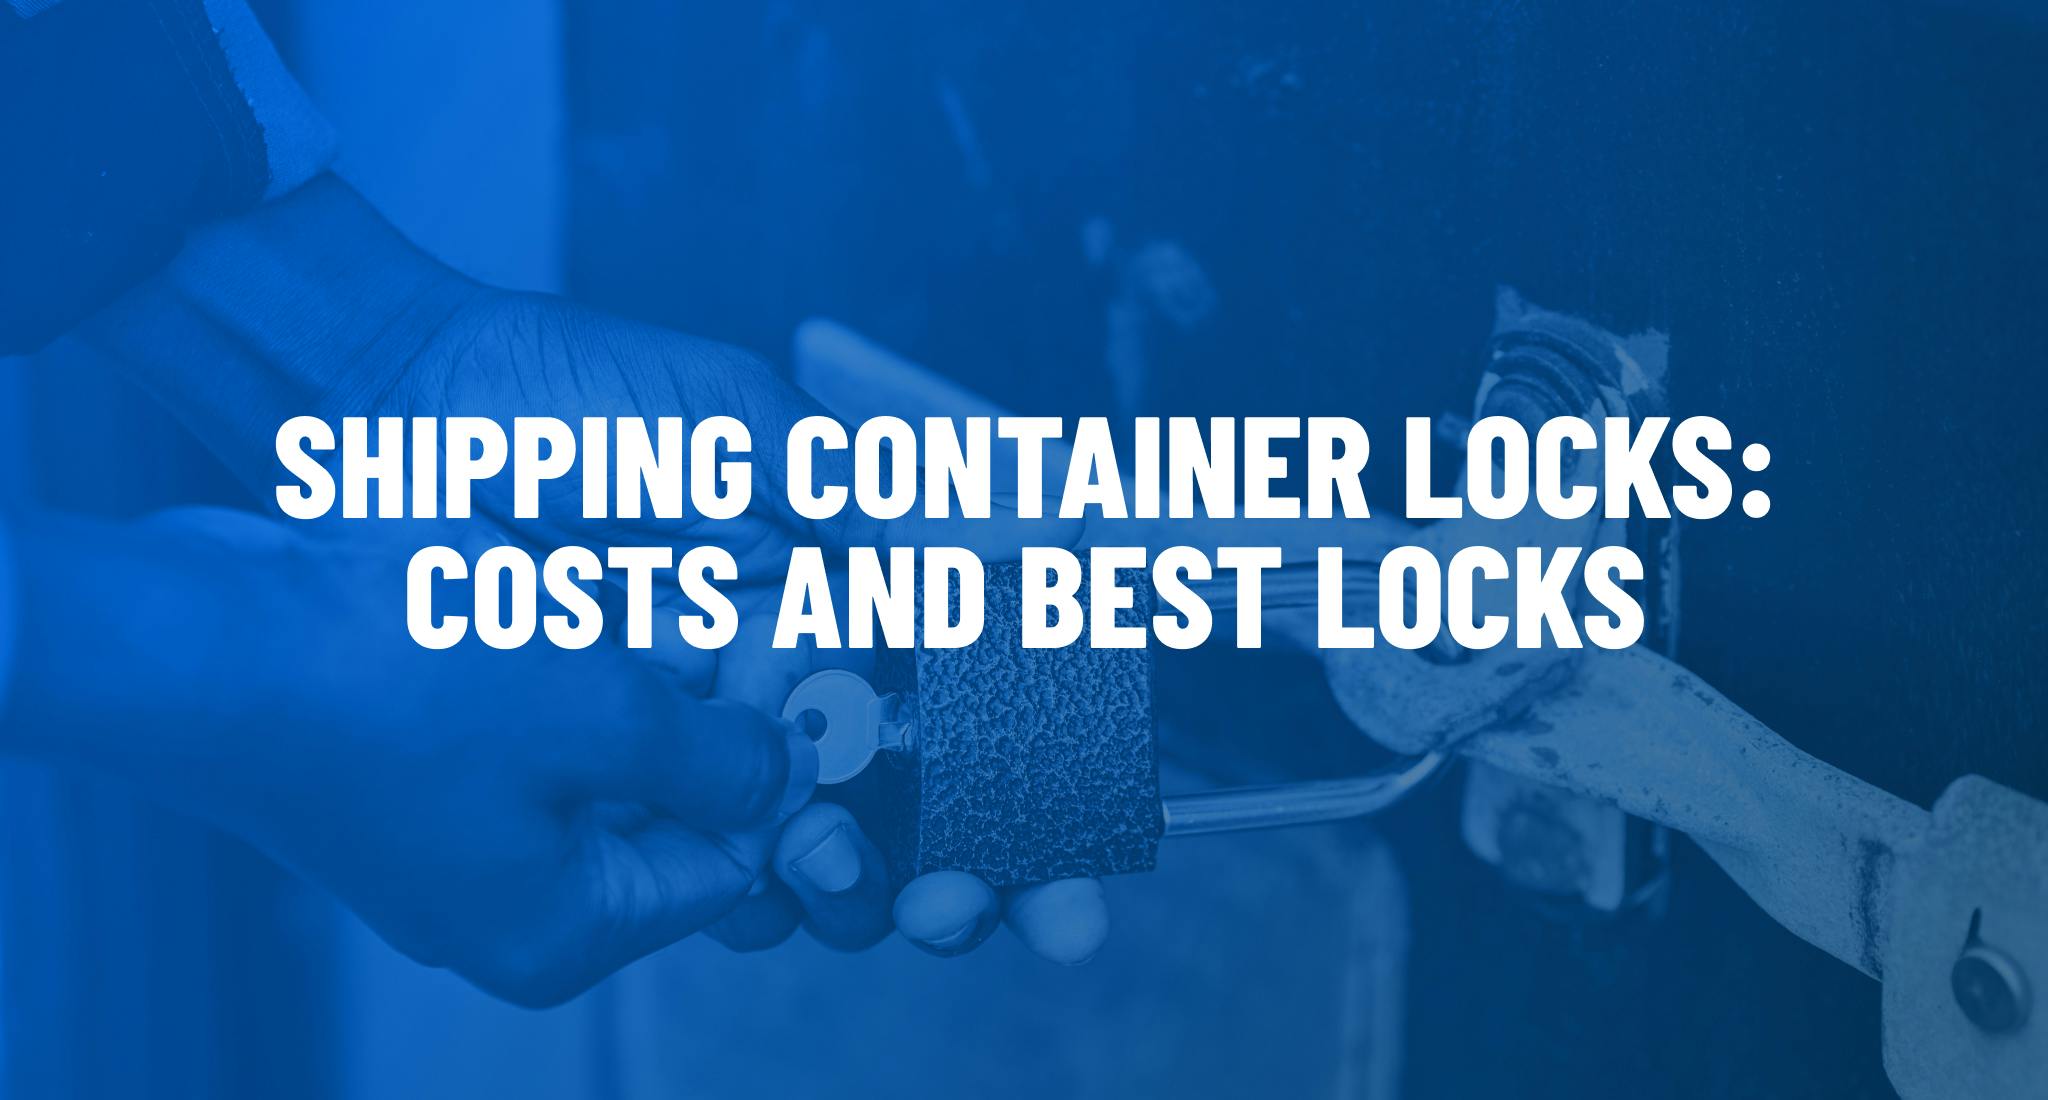 Shipping container locks: costs of best locks. 